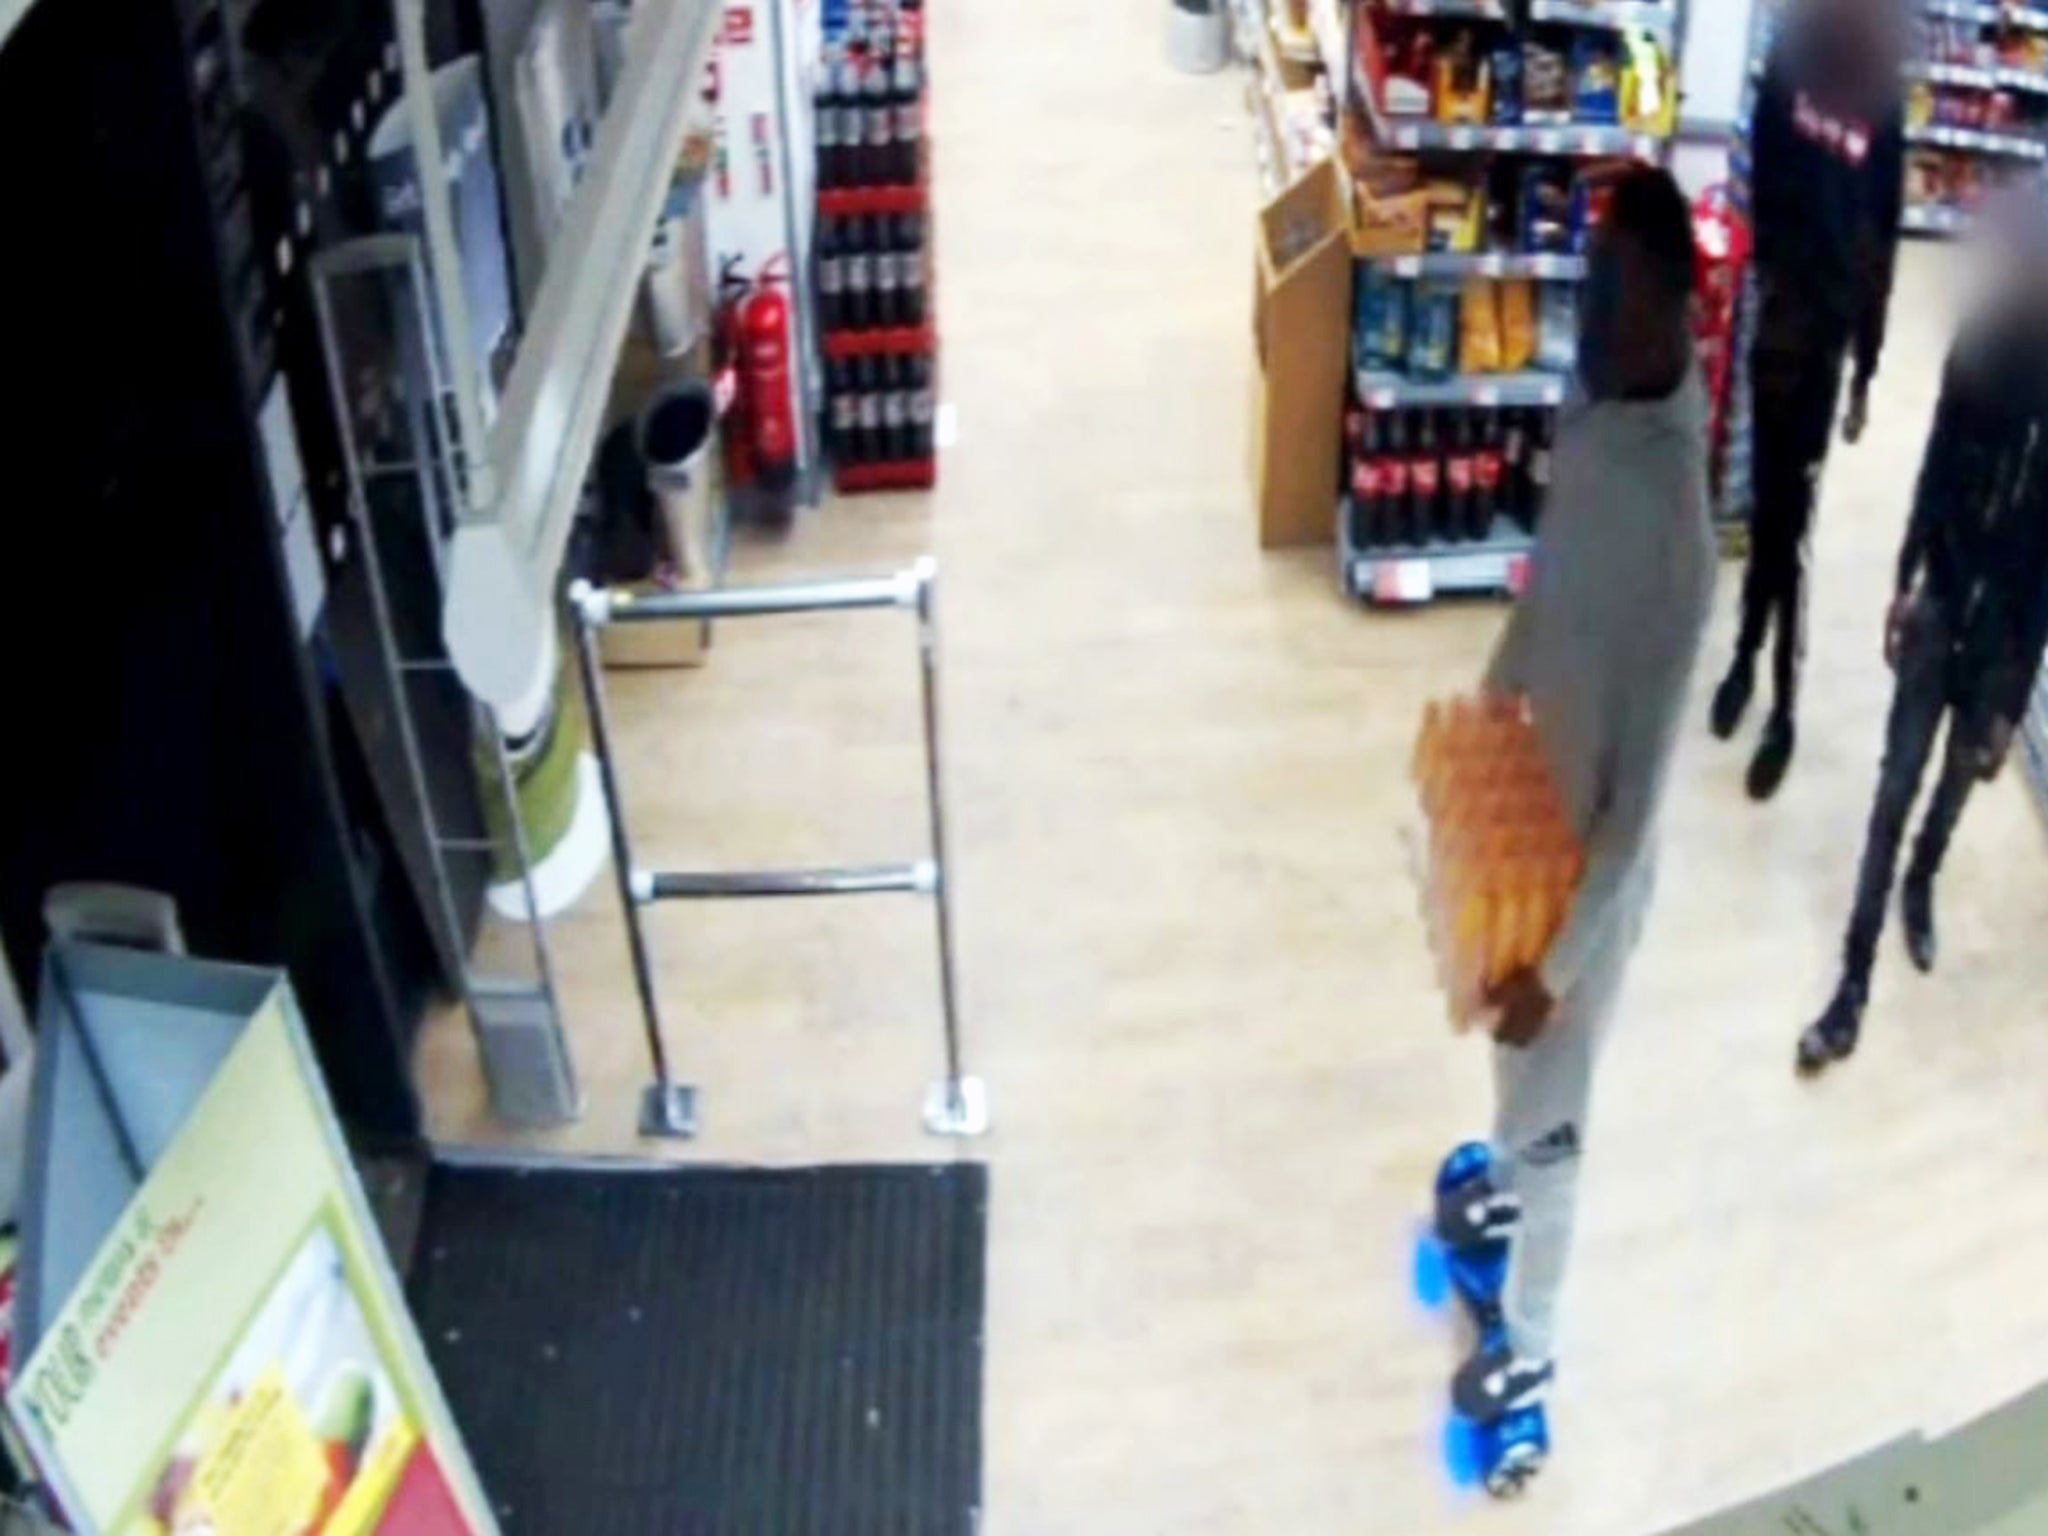 The man on the hoverboard appears to leave the store without paying for the crate of Lucozade